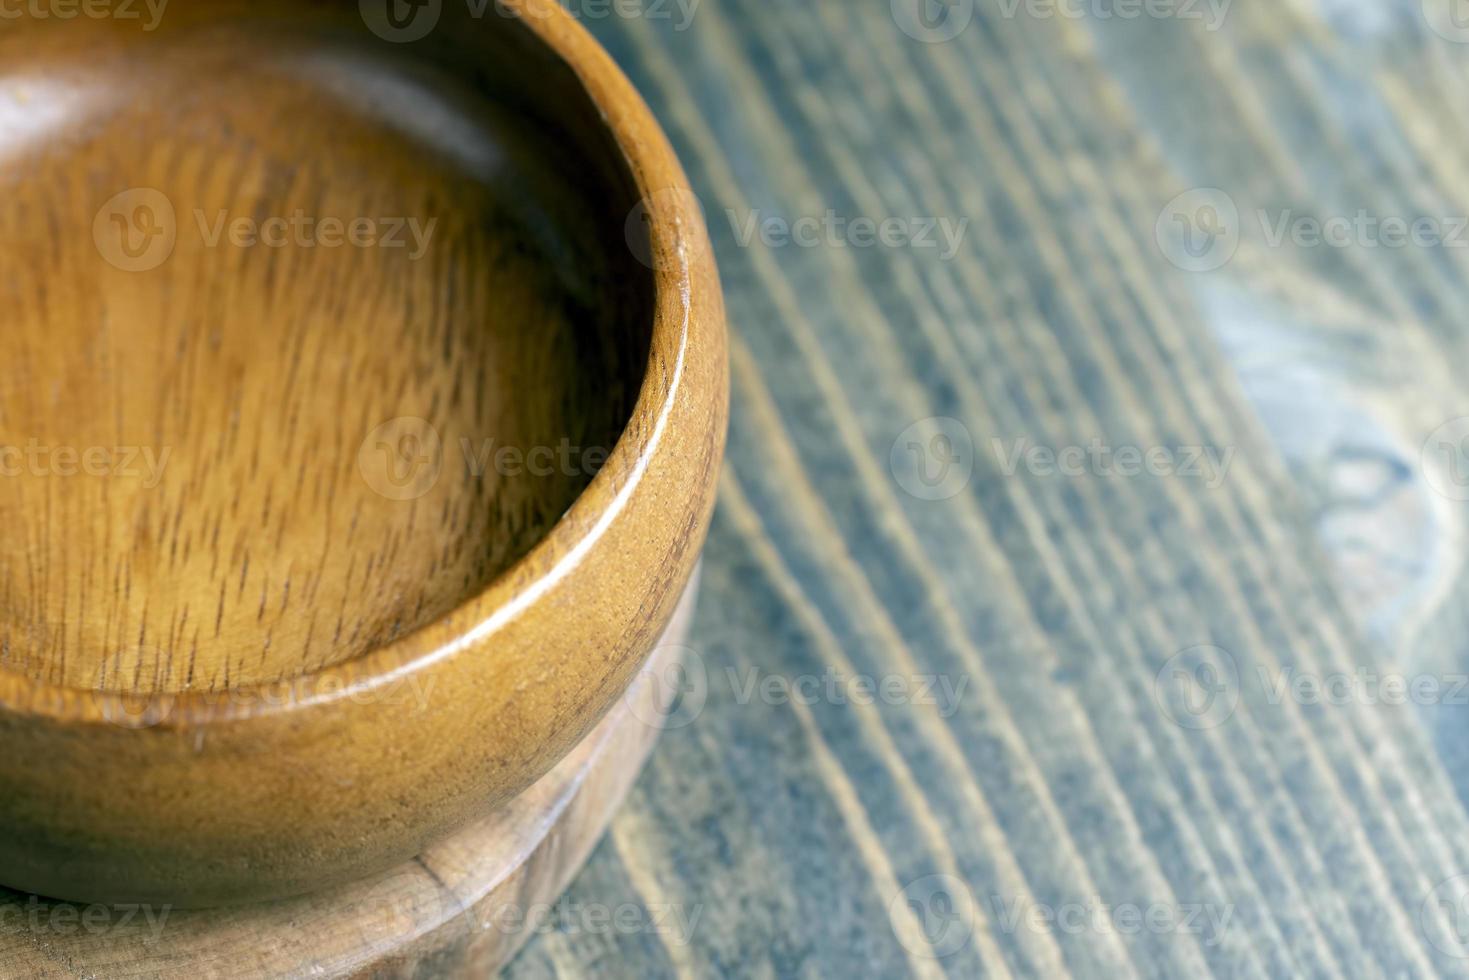 Wooden bowl on wooden table, empty round bowl for groceries and food photo